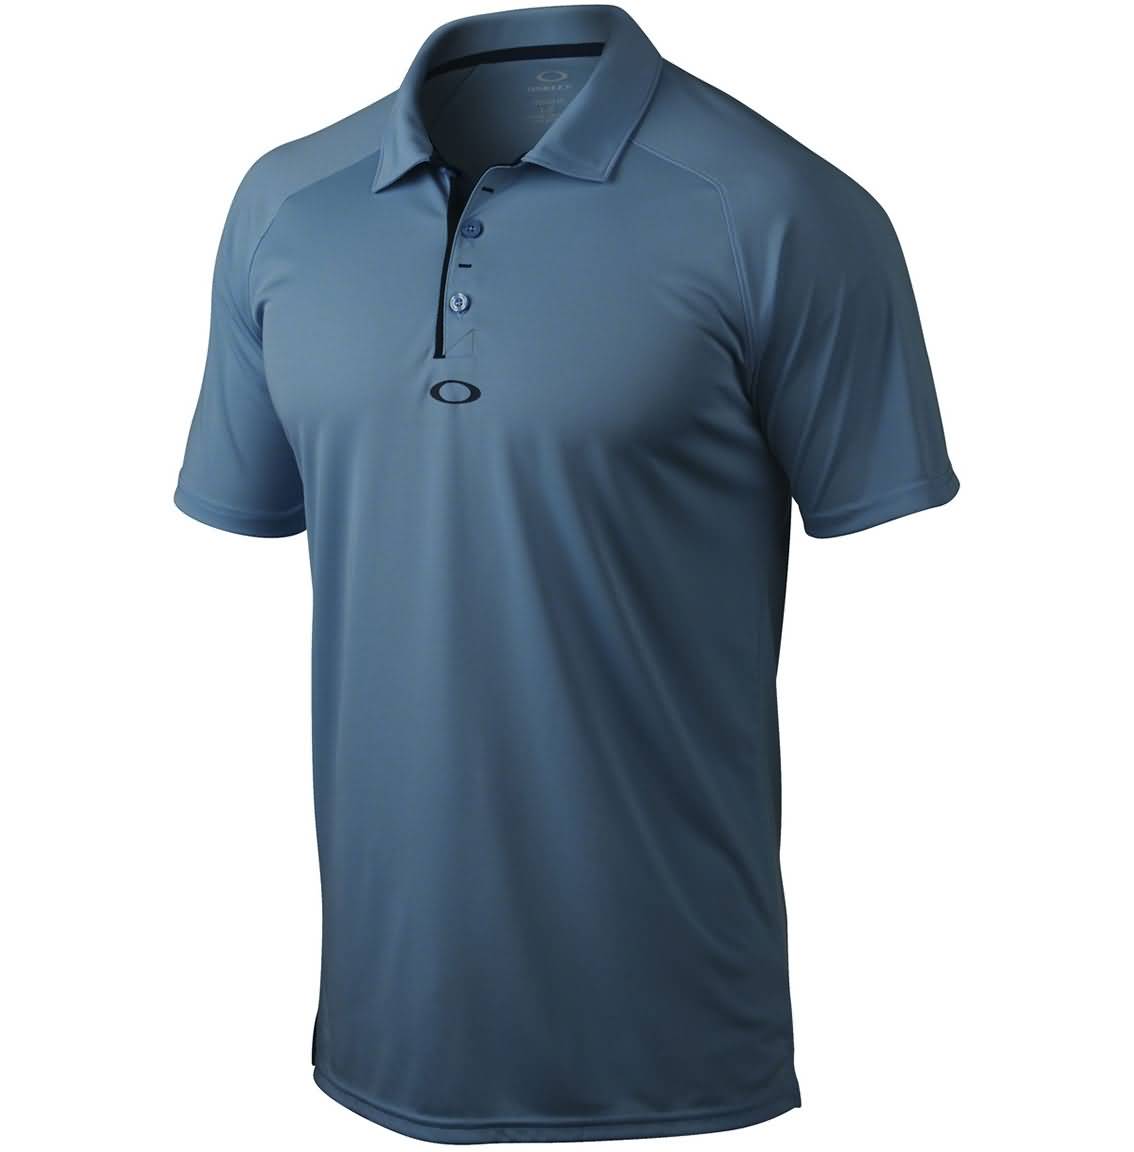 Oakley Fall 2017 Mens Lifestyle Sportswear Golf Polo Shirts Collection ...